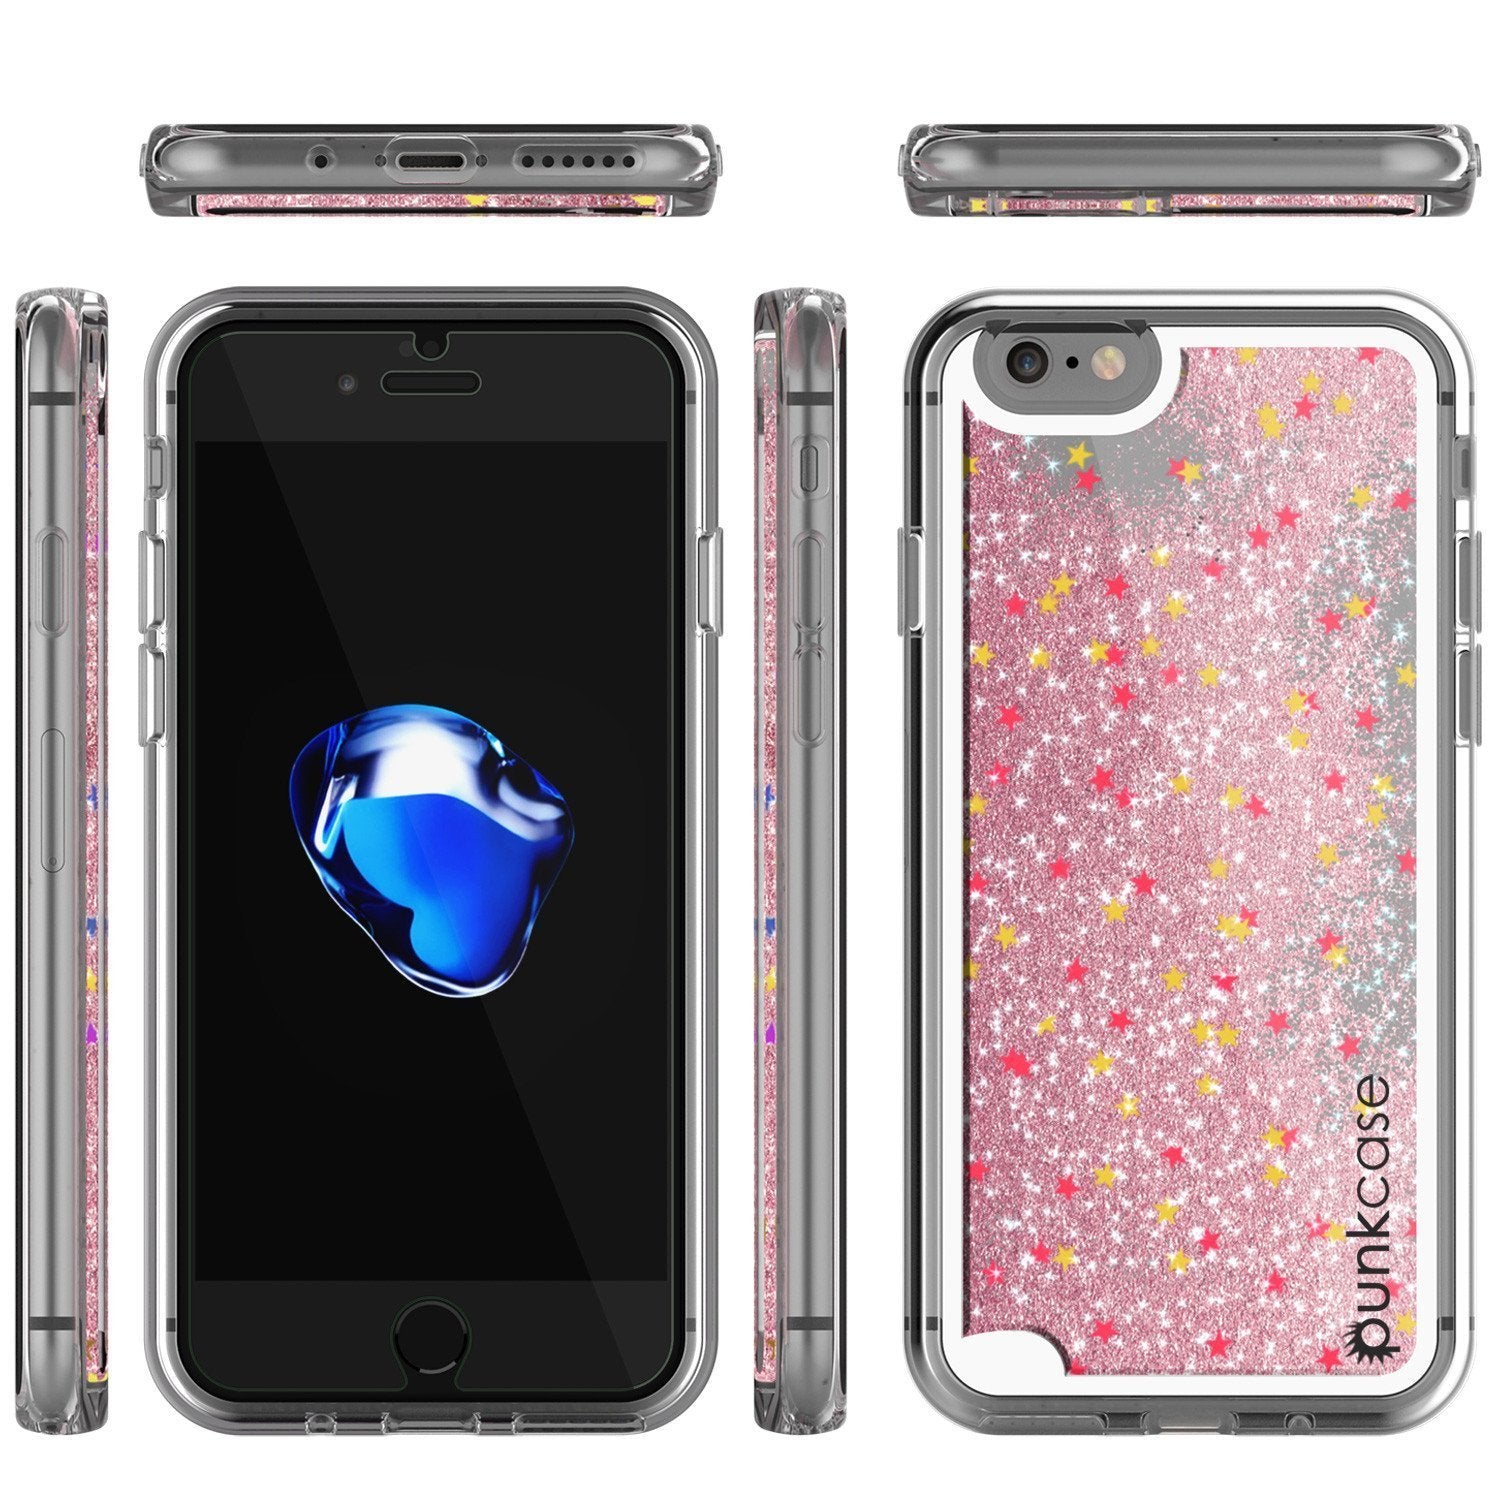 iPhone SE (4.7") Case, PunkCase LIQUID Rose Series, Protective Dual Layer Floating Glitter Cover